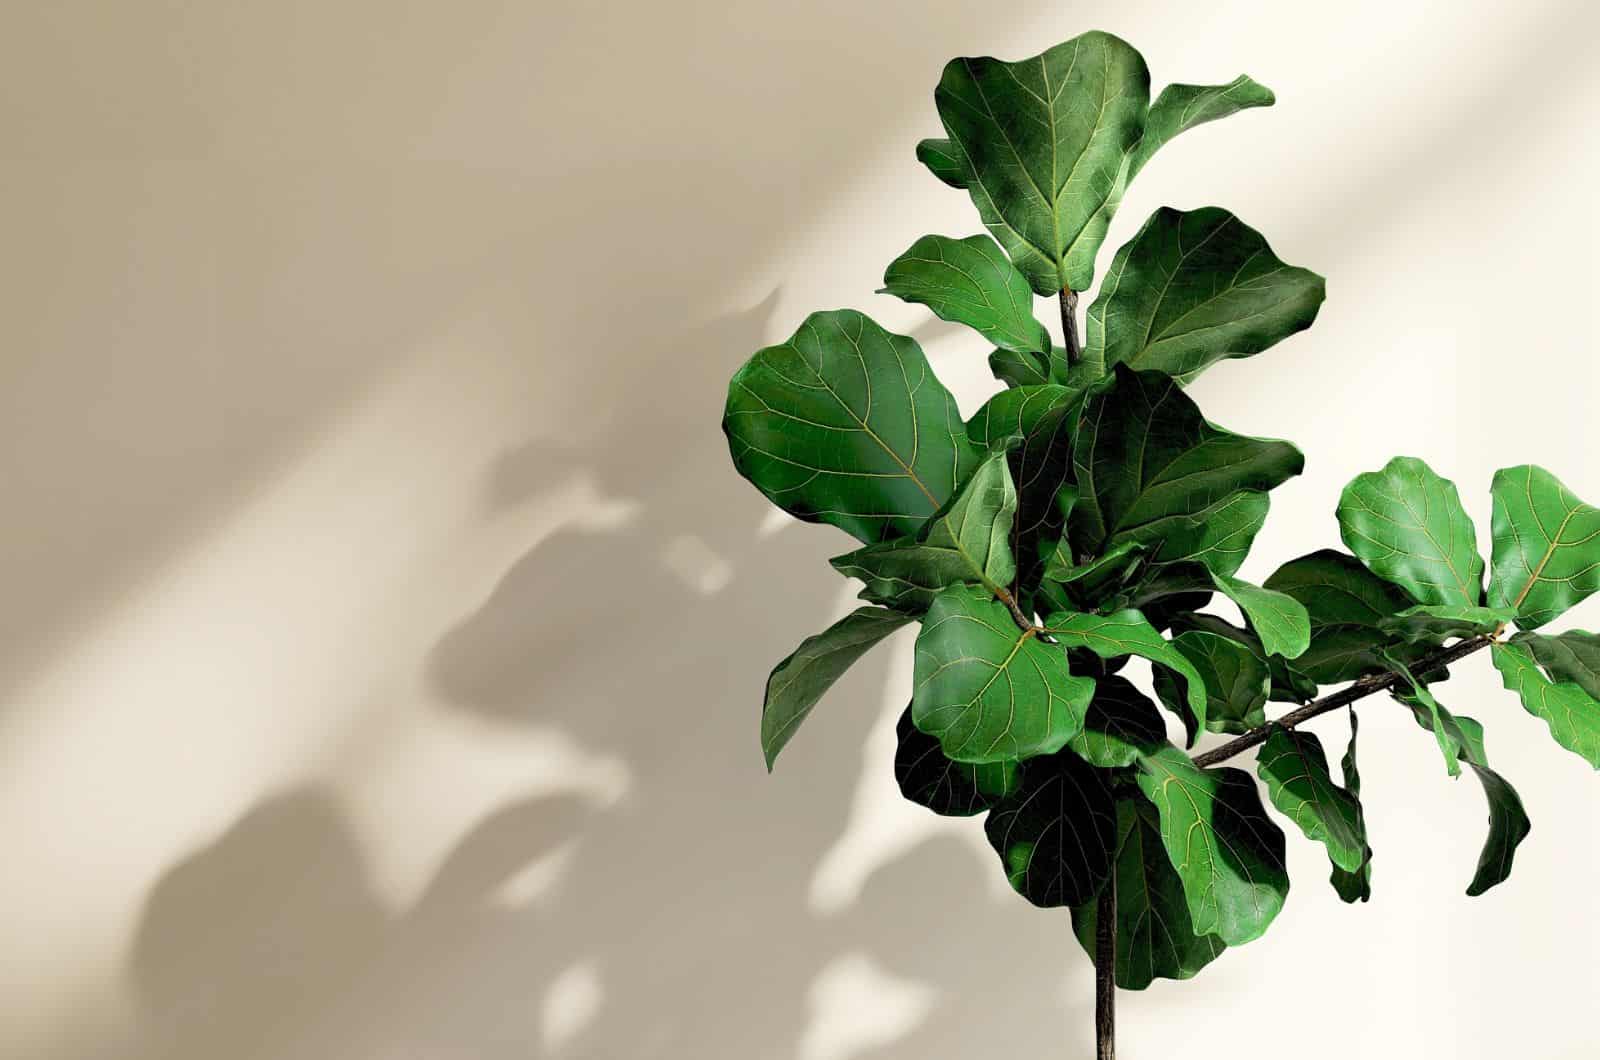 Fiddle Leaf Fig with curled leaves